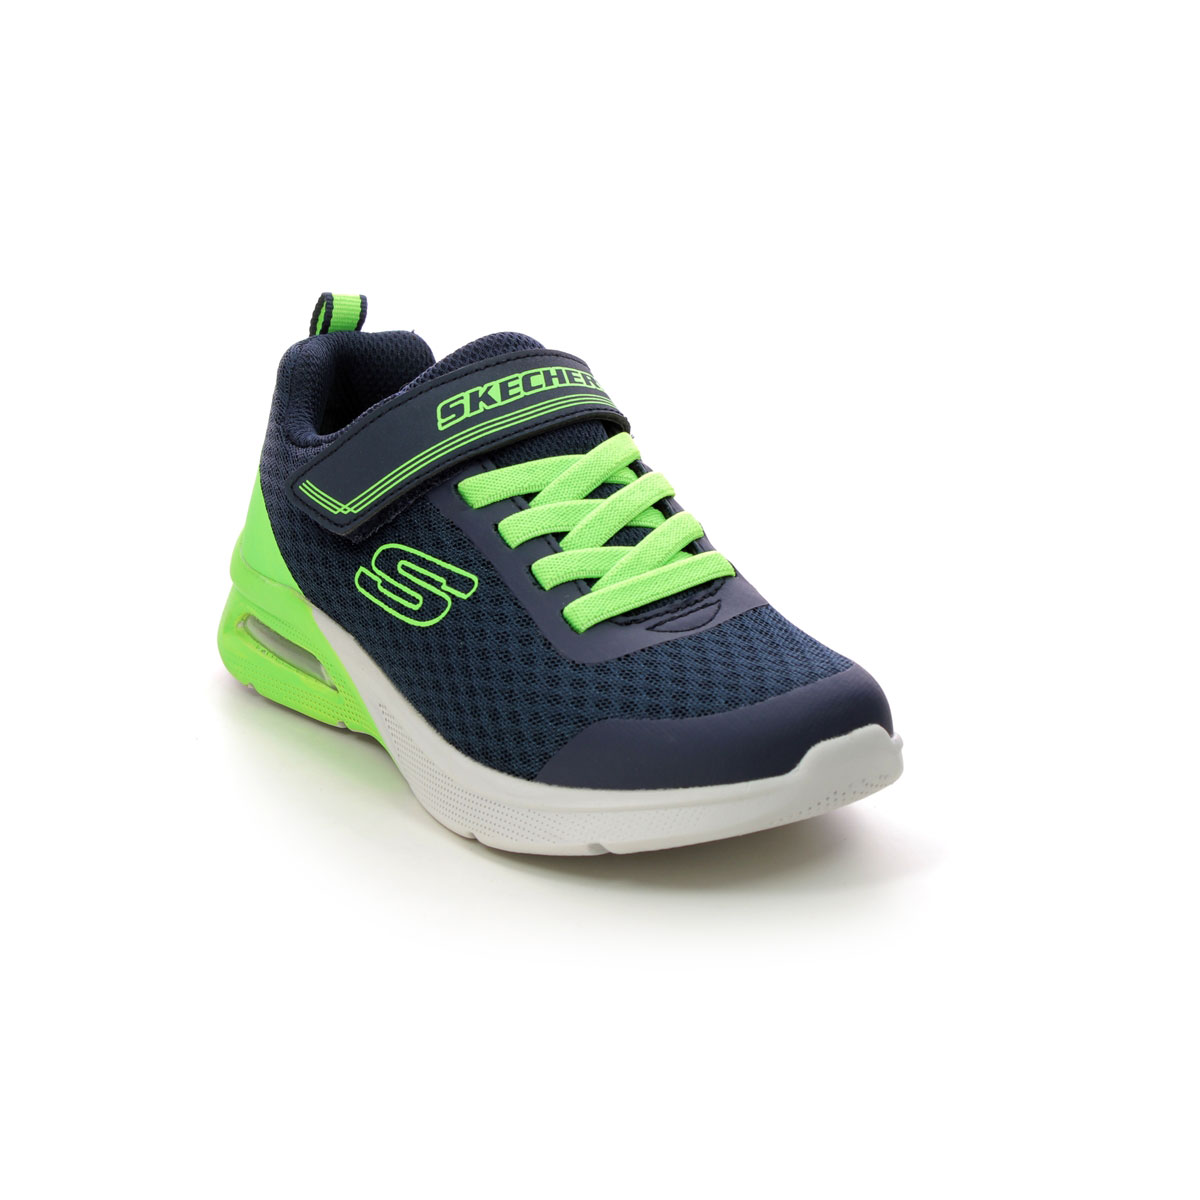 Skechers Microspec Max Navy Lime Kids Trainers 403773L In Size 37 In Plain Navy Lime For kids